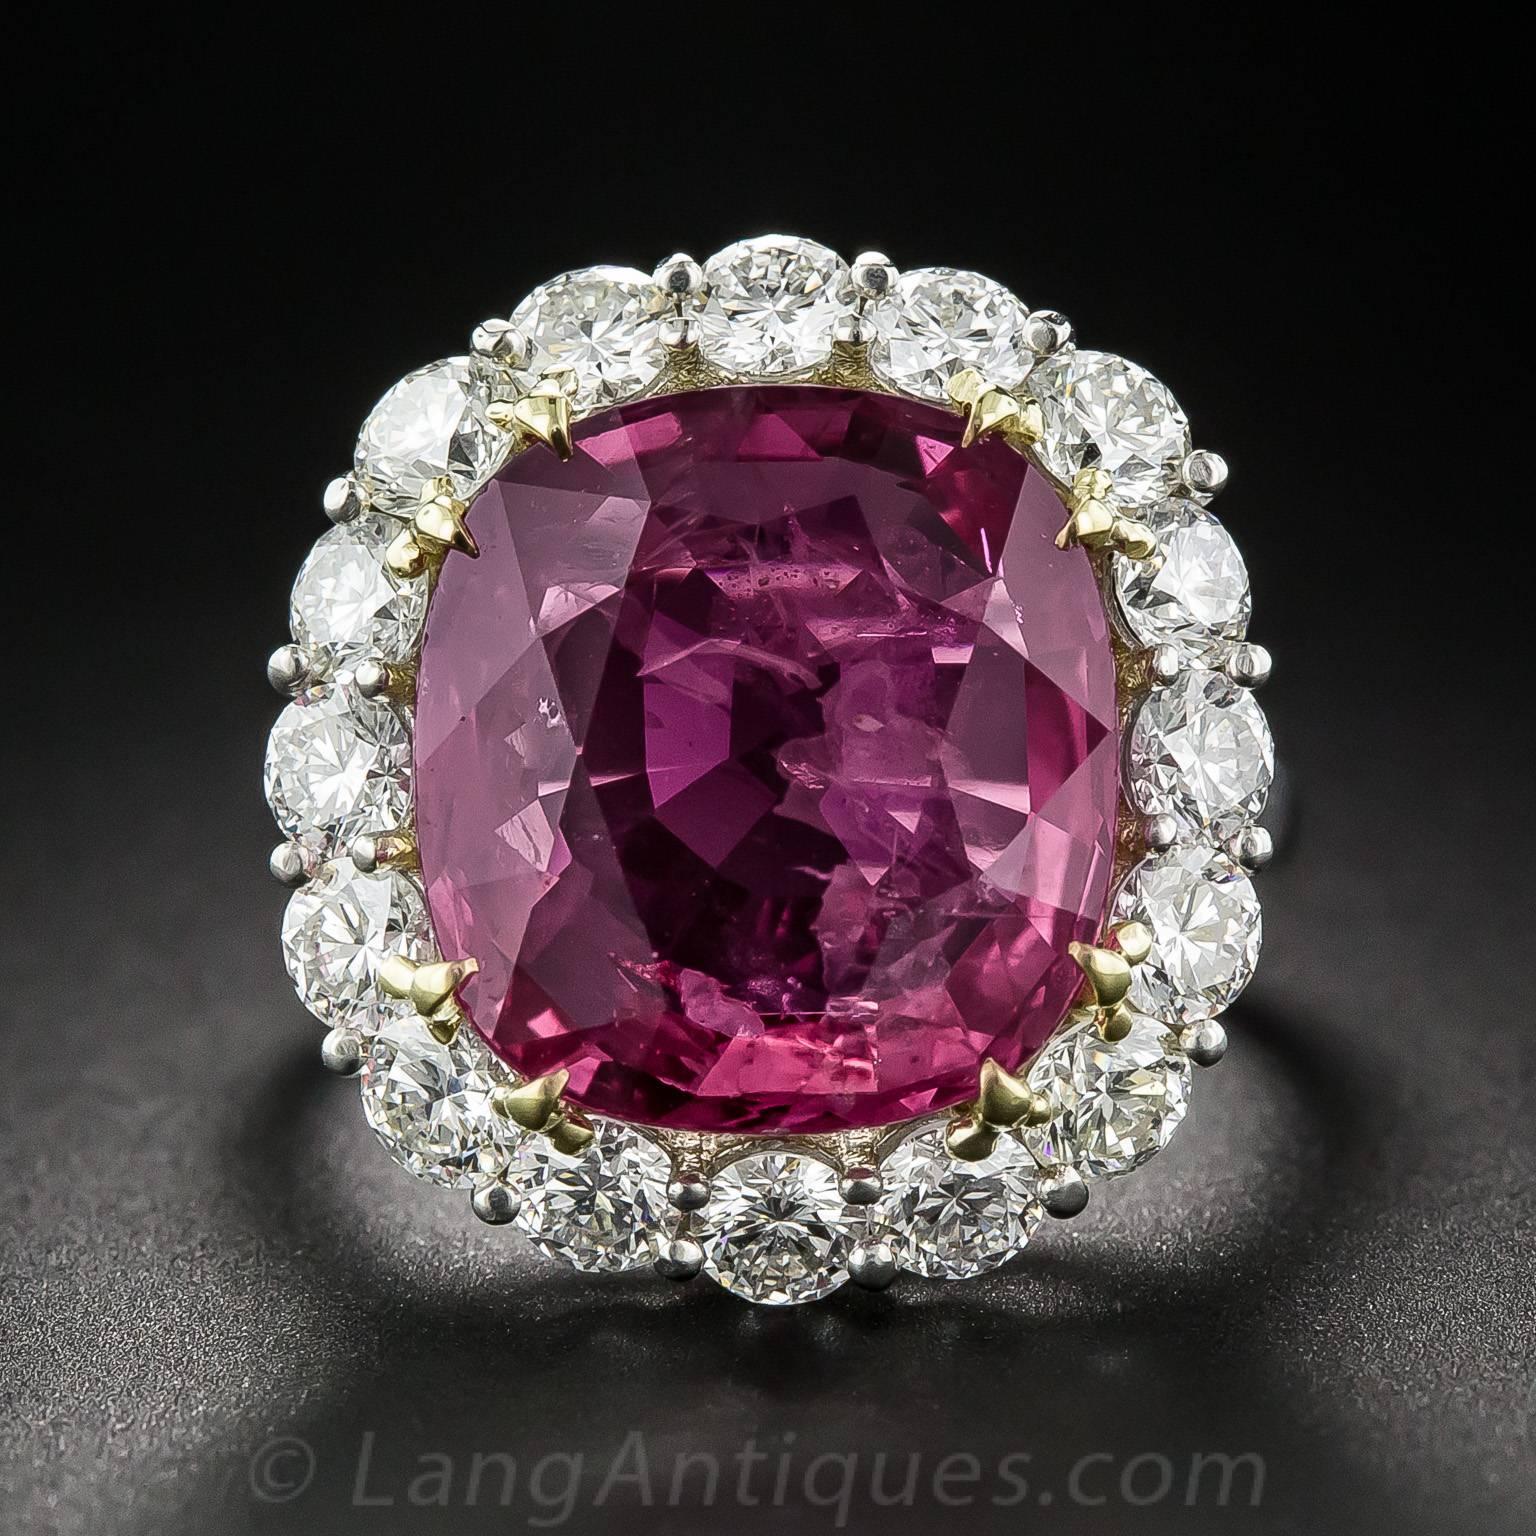 Although weighing in at an impressive 9.82 carats, the relatively shallow cut of this enchanting raspberry red Thai ruby makes it look closer to a 20 carat stone.  The beautiful and impressive gemstone is classically presented in platinum, set with